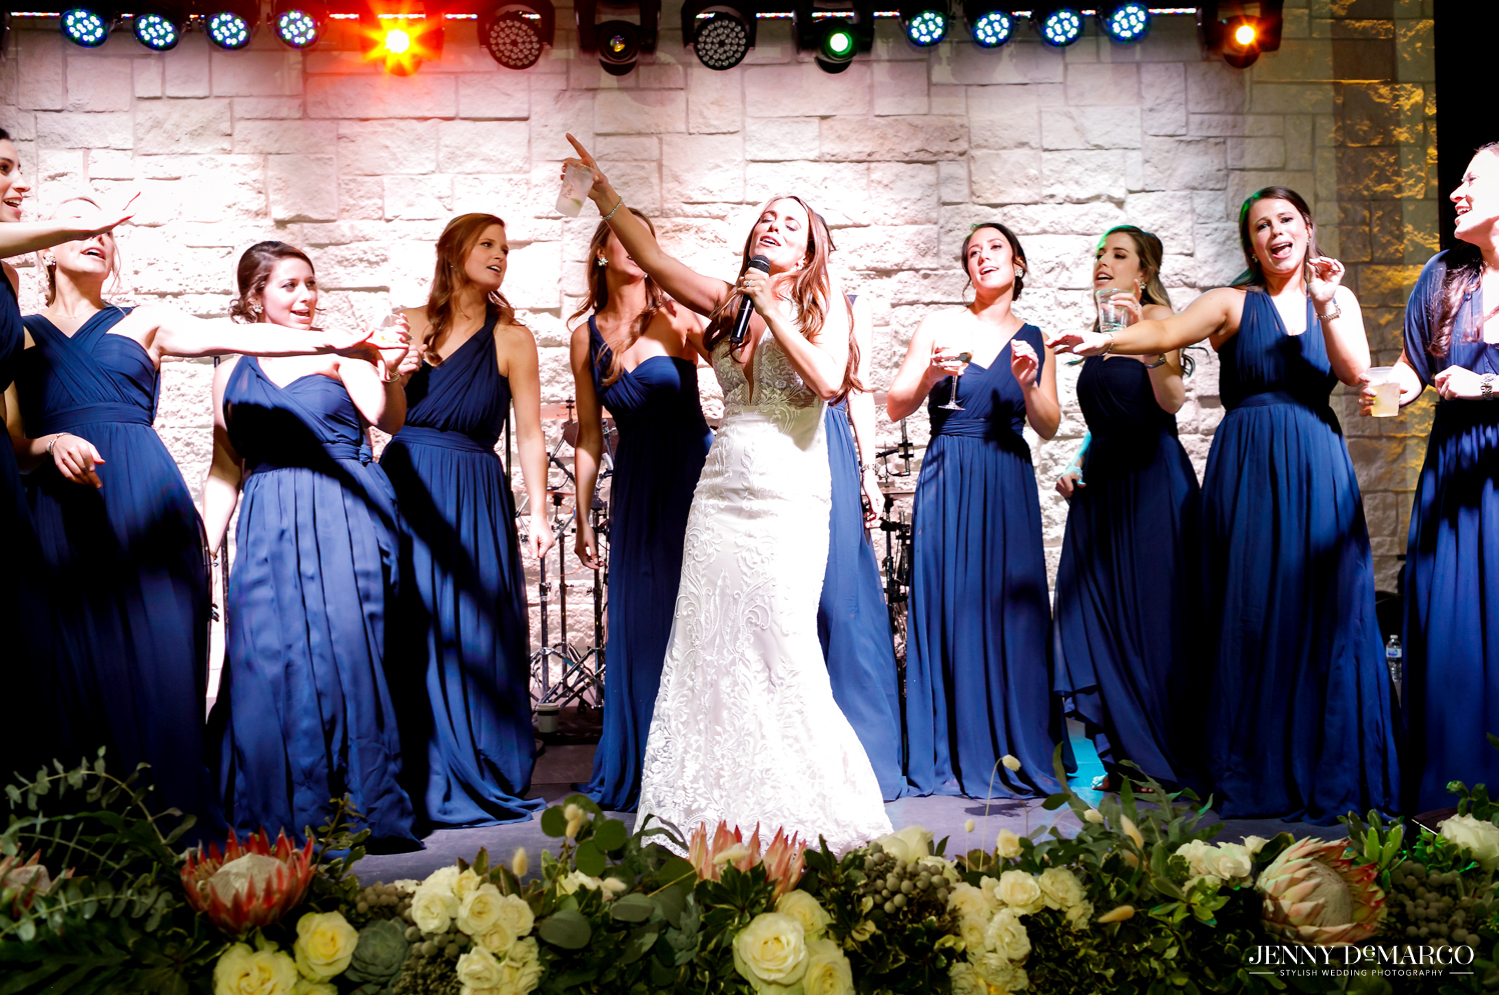 Bride and bridesmaids singing on stage